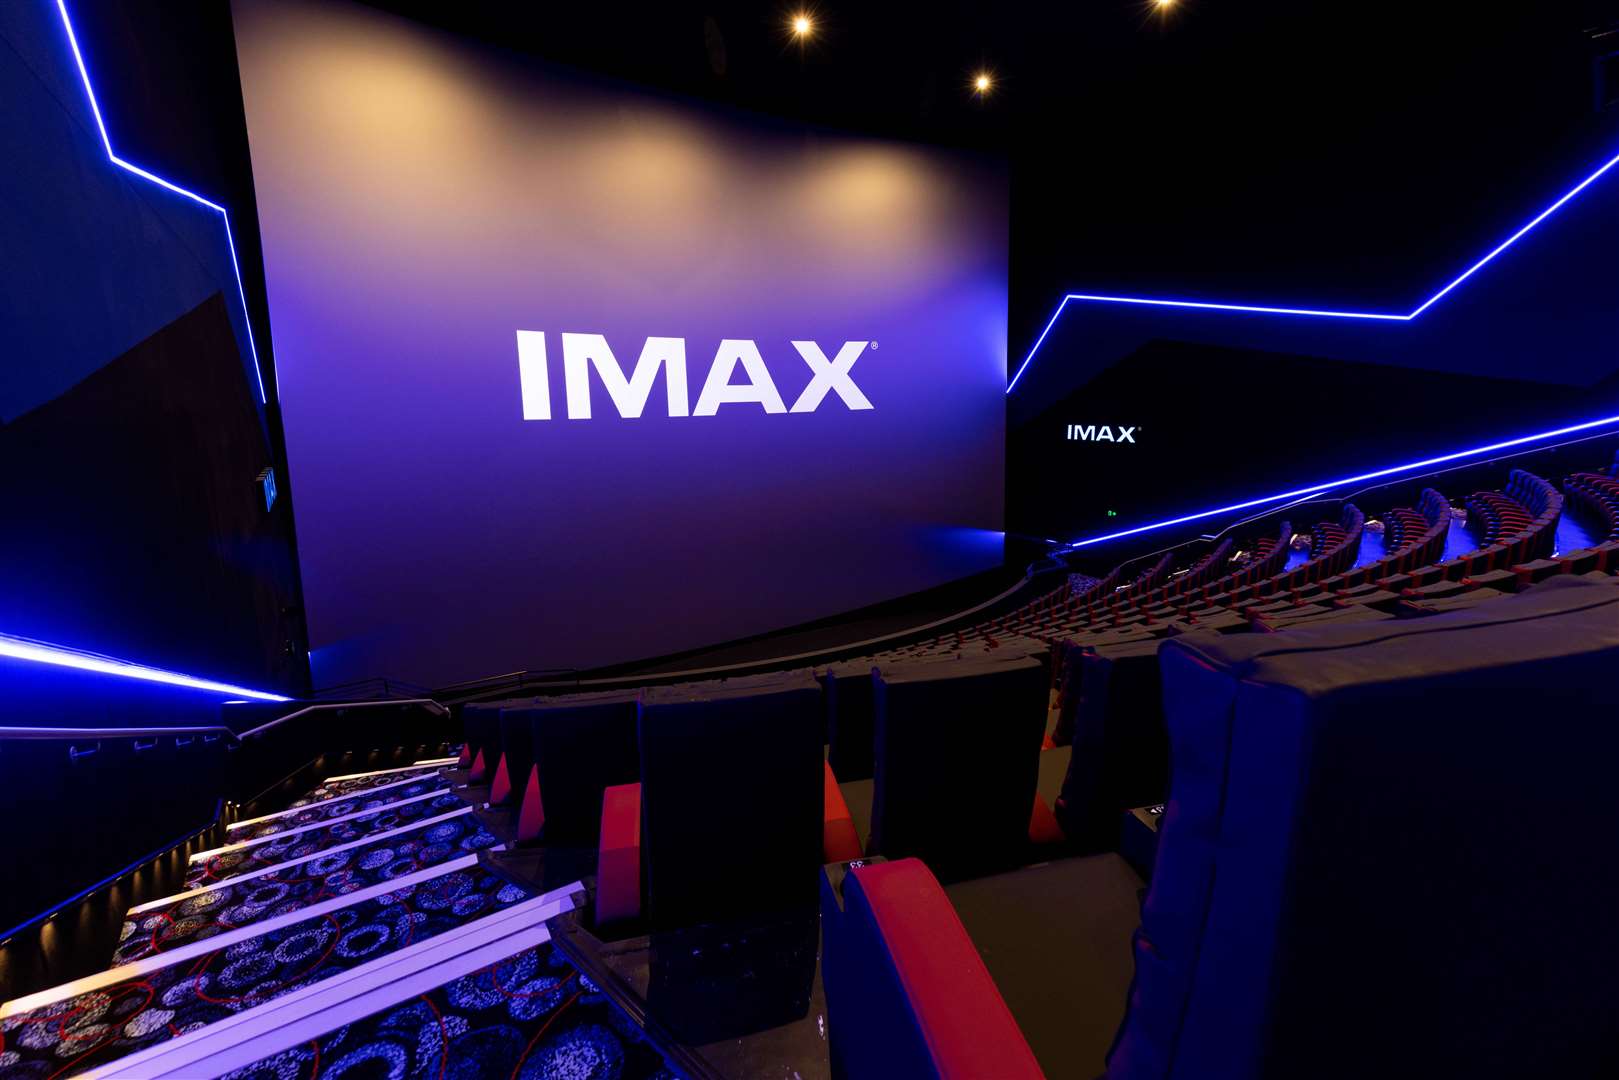 The IMAX screen officially opens today. Picture: Andrew Fosker / PinPep